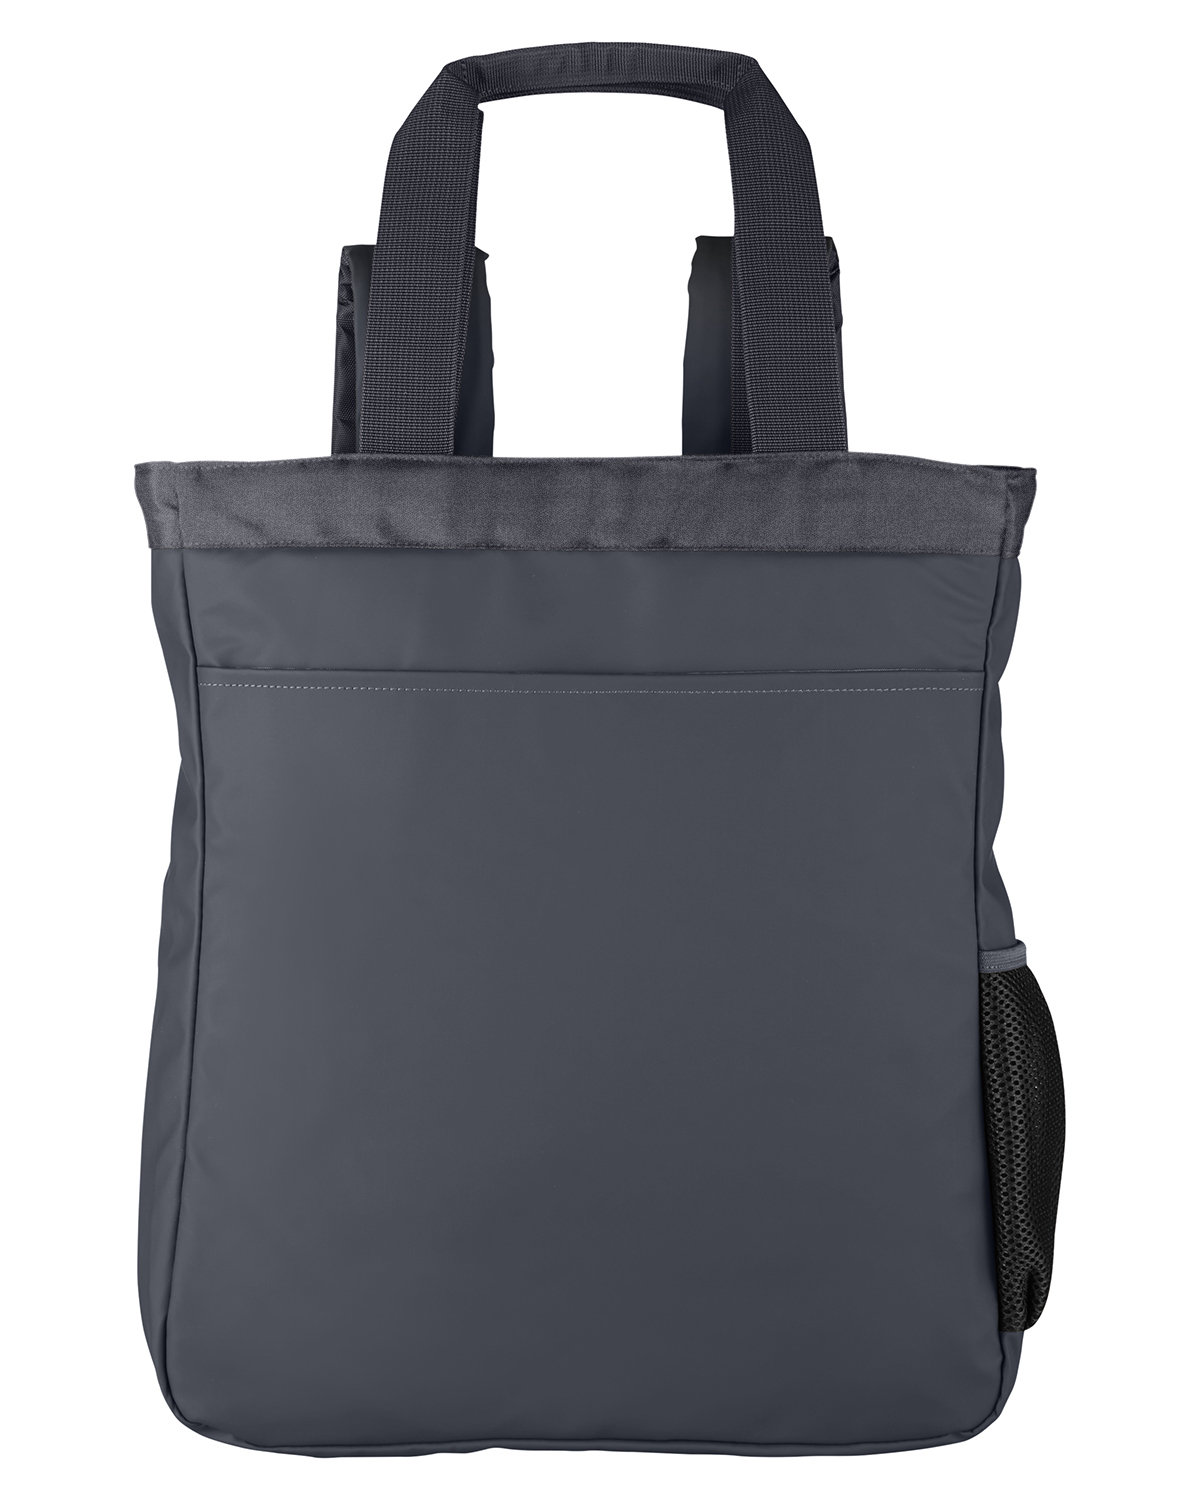 North End Men's Reflective Convertible Backpack Tote CARBON 